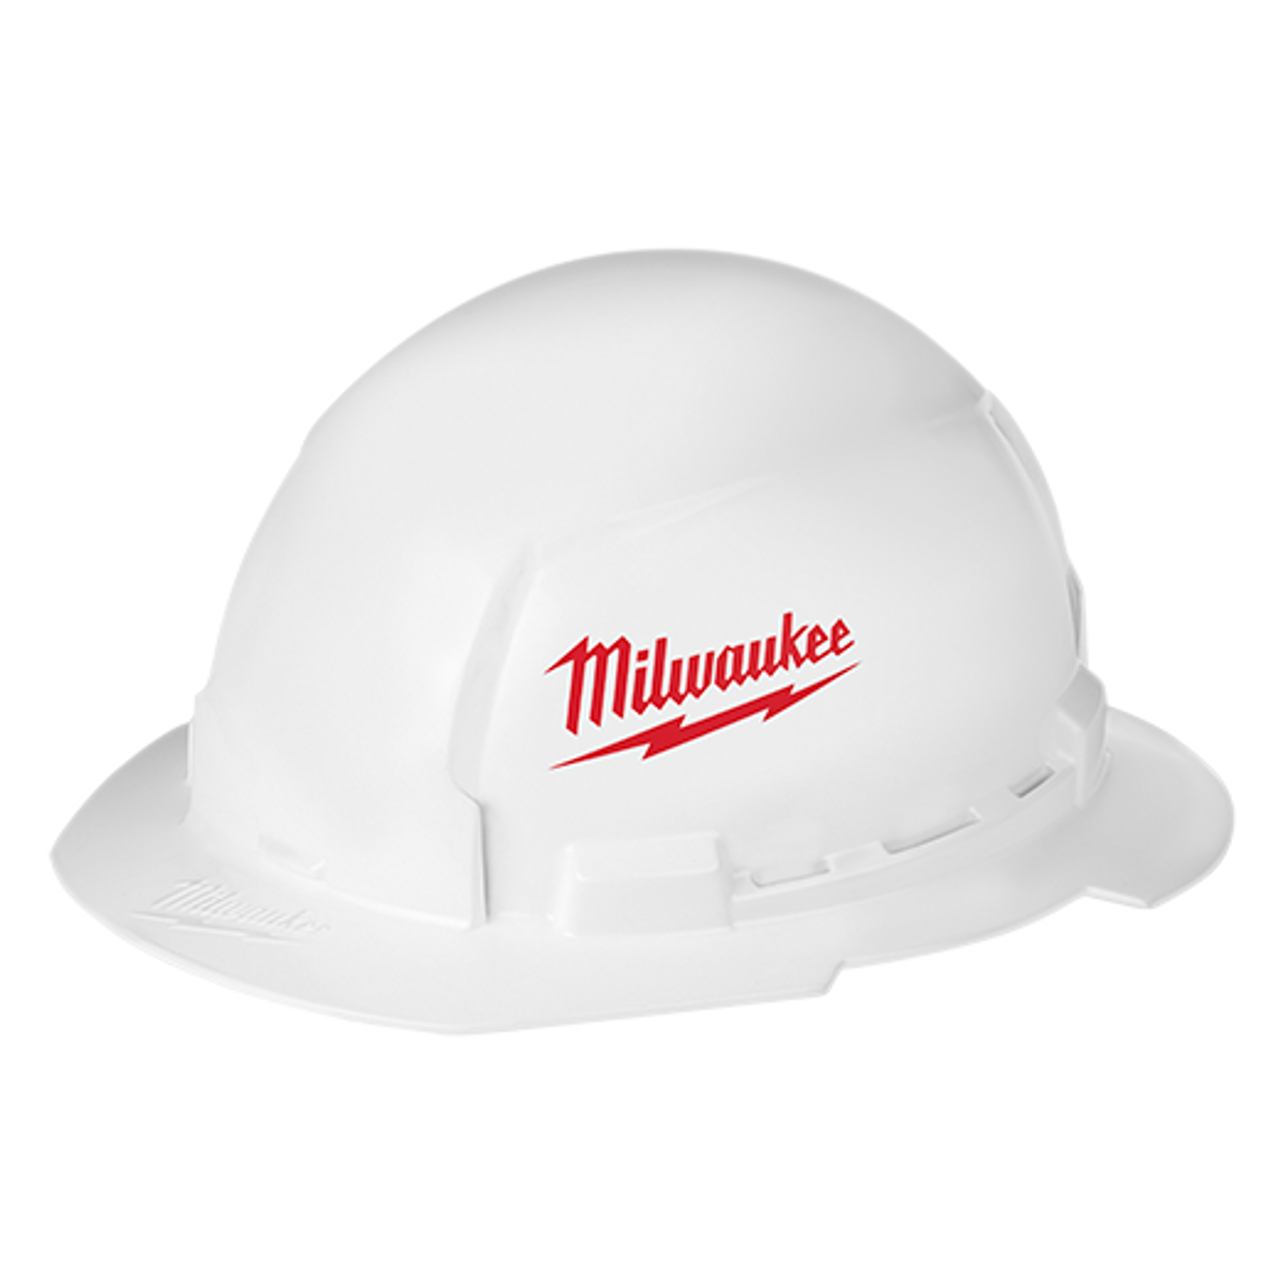 Full Brim Hard Hat with BOLT™ Accessories – Type 1 Class E